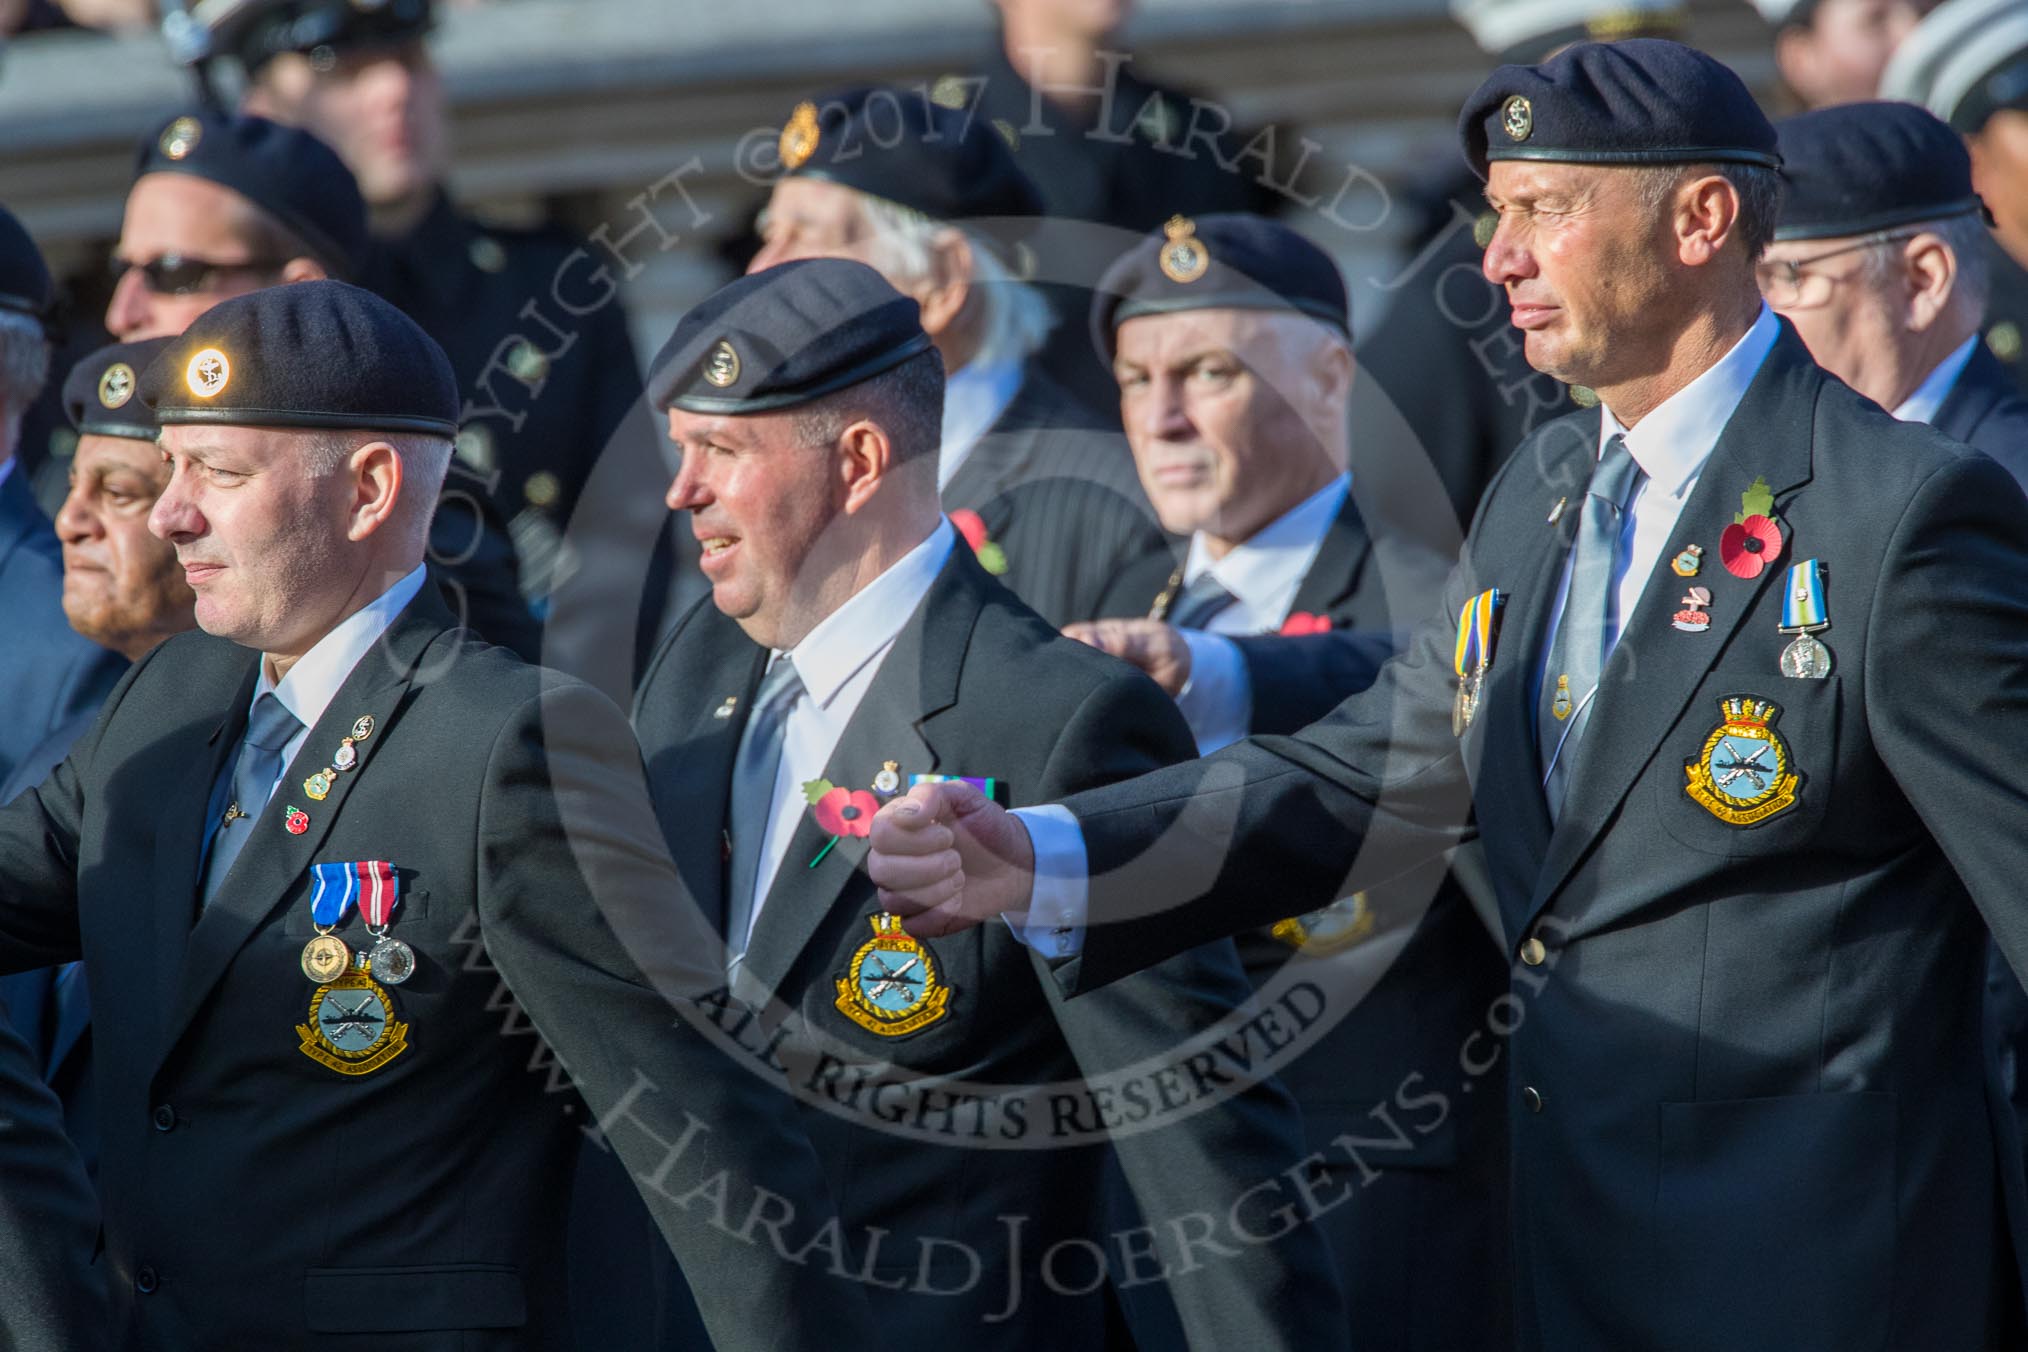 Type 42 Association   (Group E30, 47 members) during the Royal British Legion March Past on Remembrance Sunday at the Cenotaph, Whitehall, Westminster, London, 11 November 2018, 11:45.